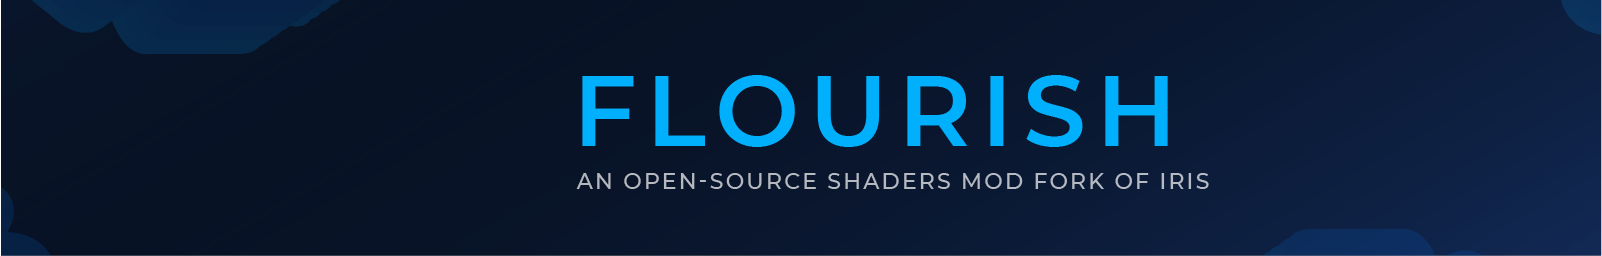 Flourish: An open-source shaders mod compatible with OptiFine shaderpacks